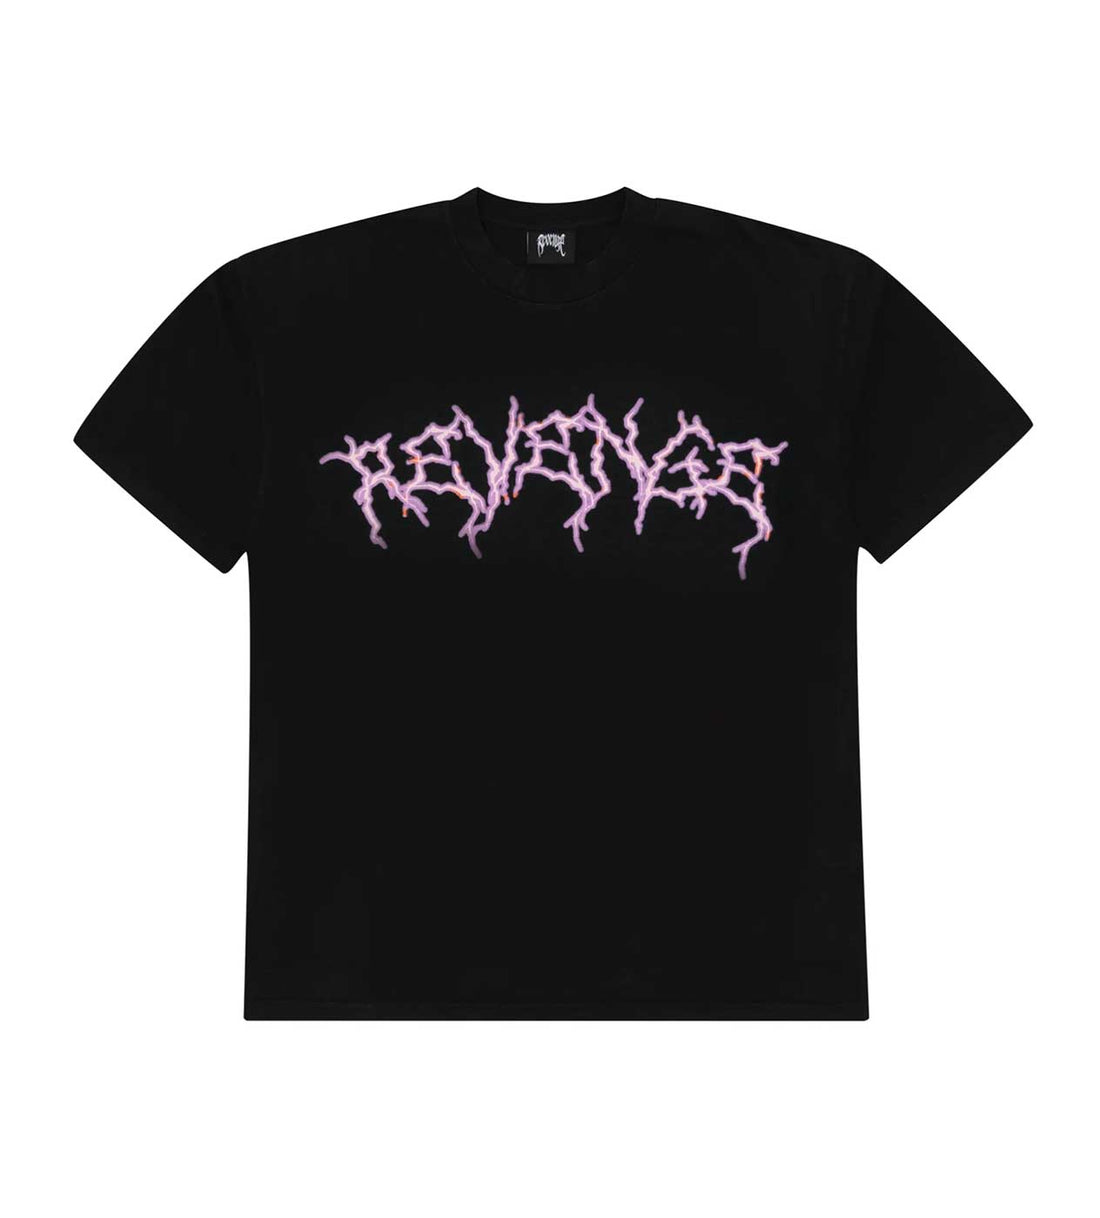 Revenge Lightning Anarchy Tee Black Front View